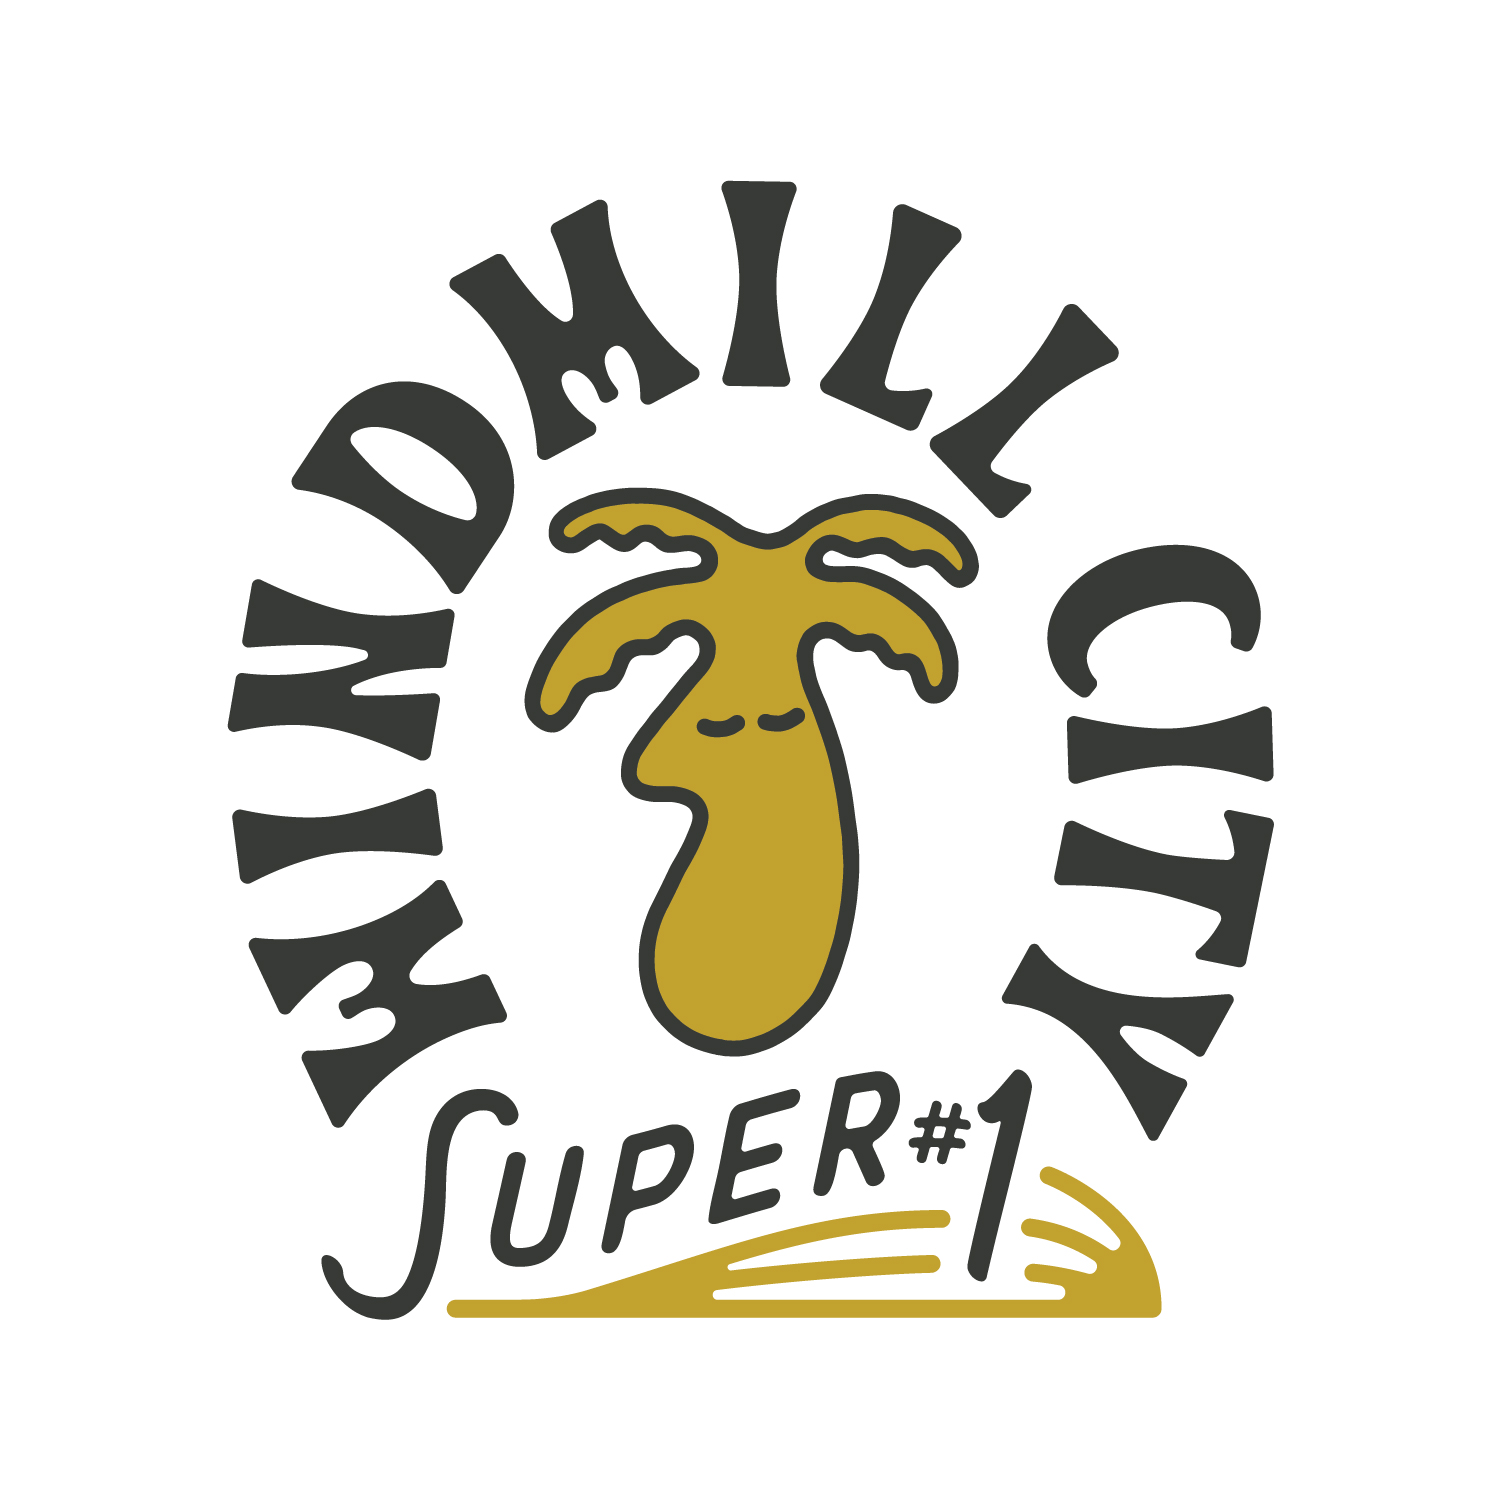 Windmill City Super #1 logo design by logo designer Cactus Country for your inspiration and for the worlds largest logo competition